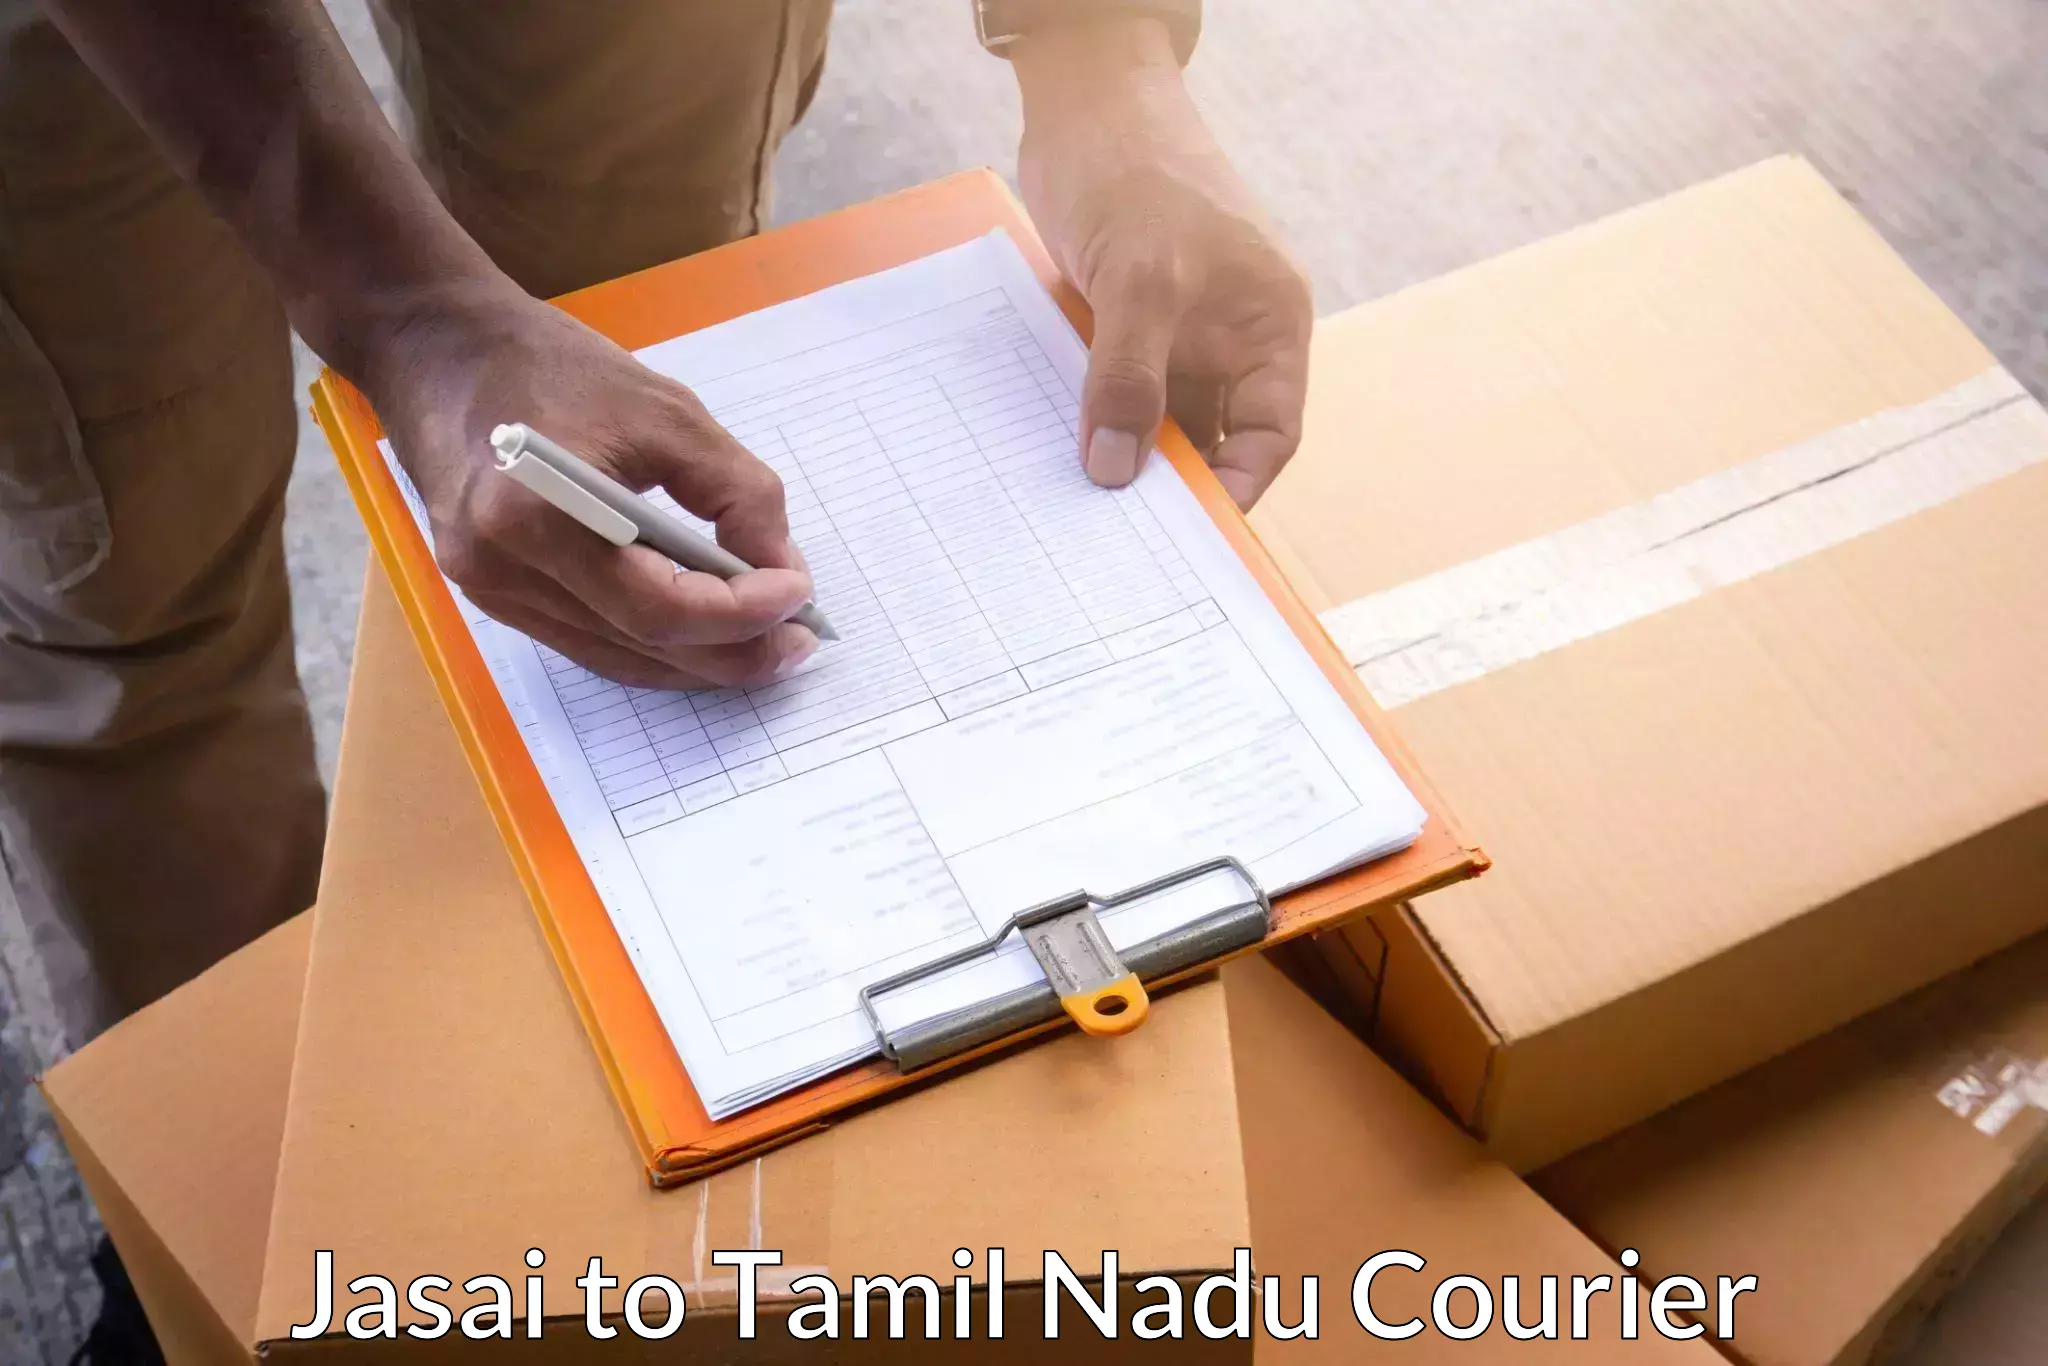 Global courier networks Jasai to Ennore Port Chennai